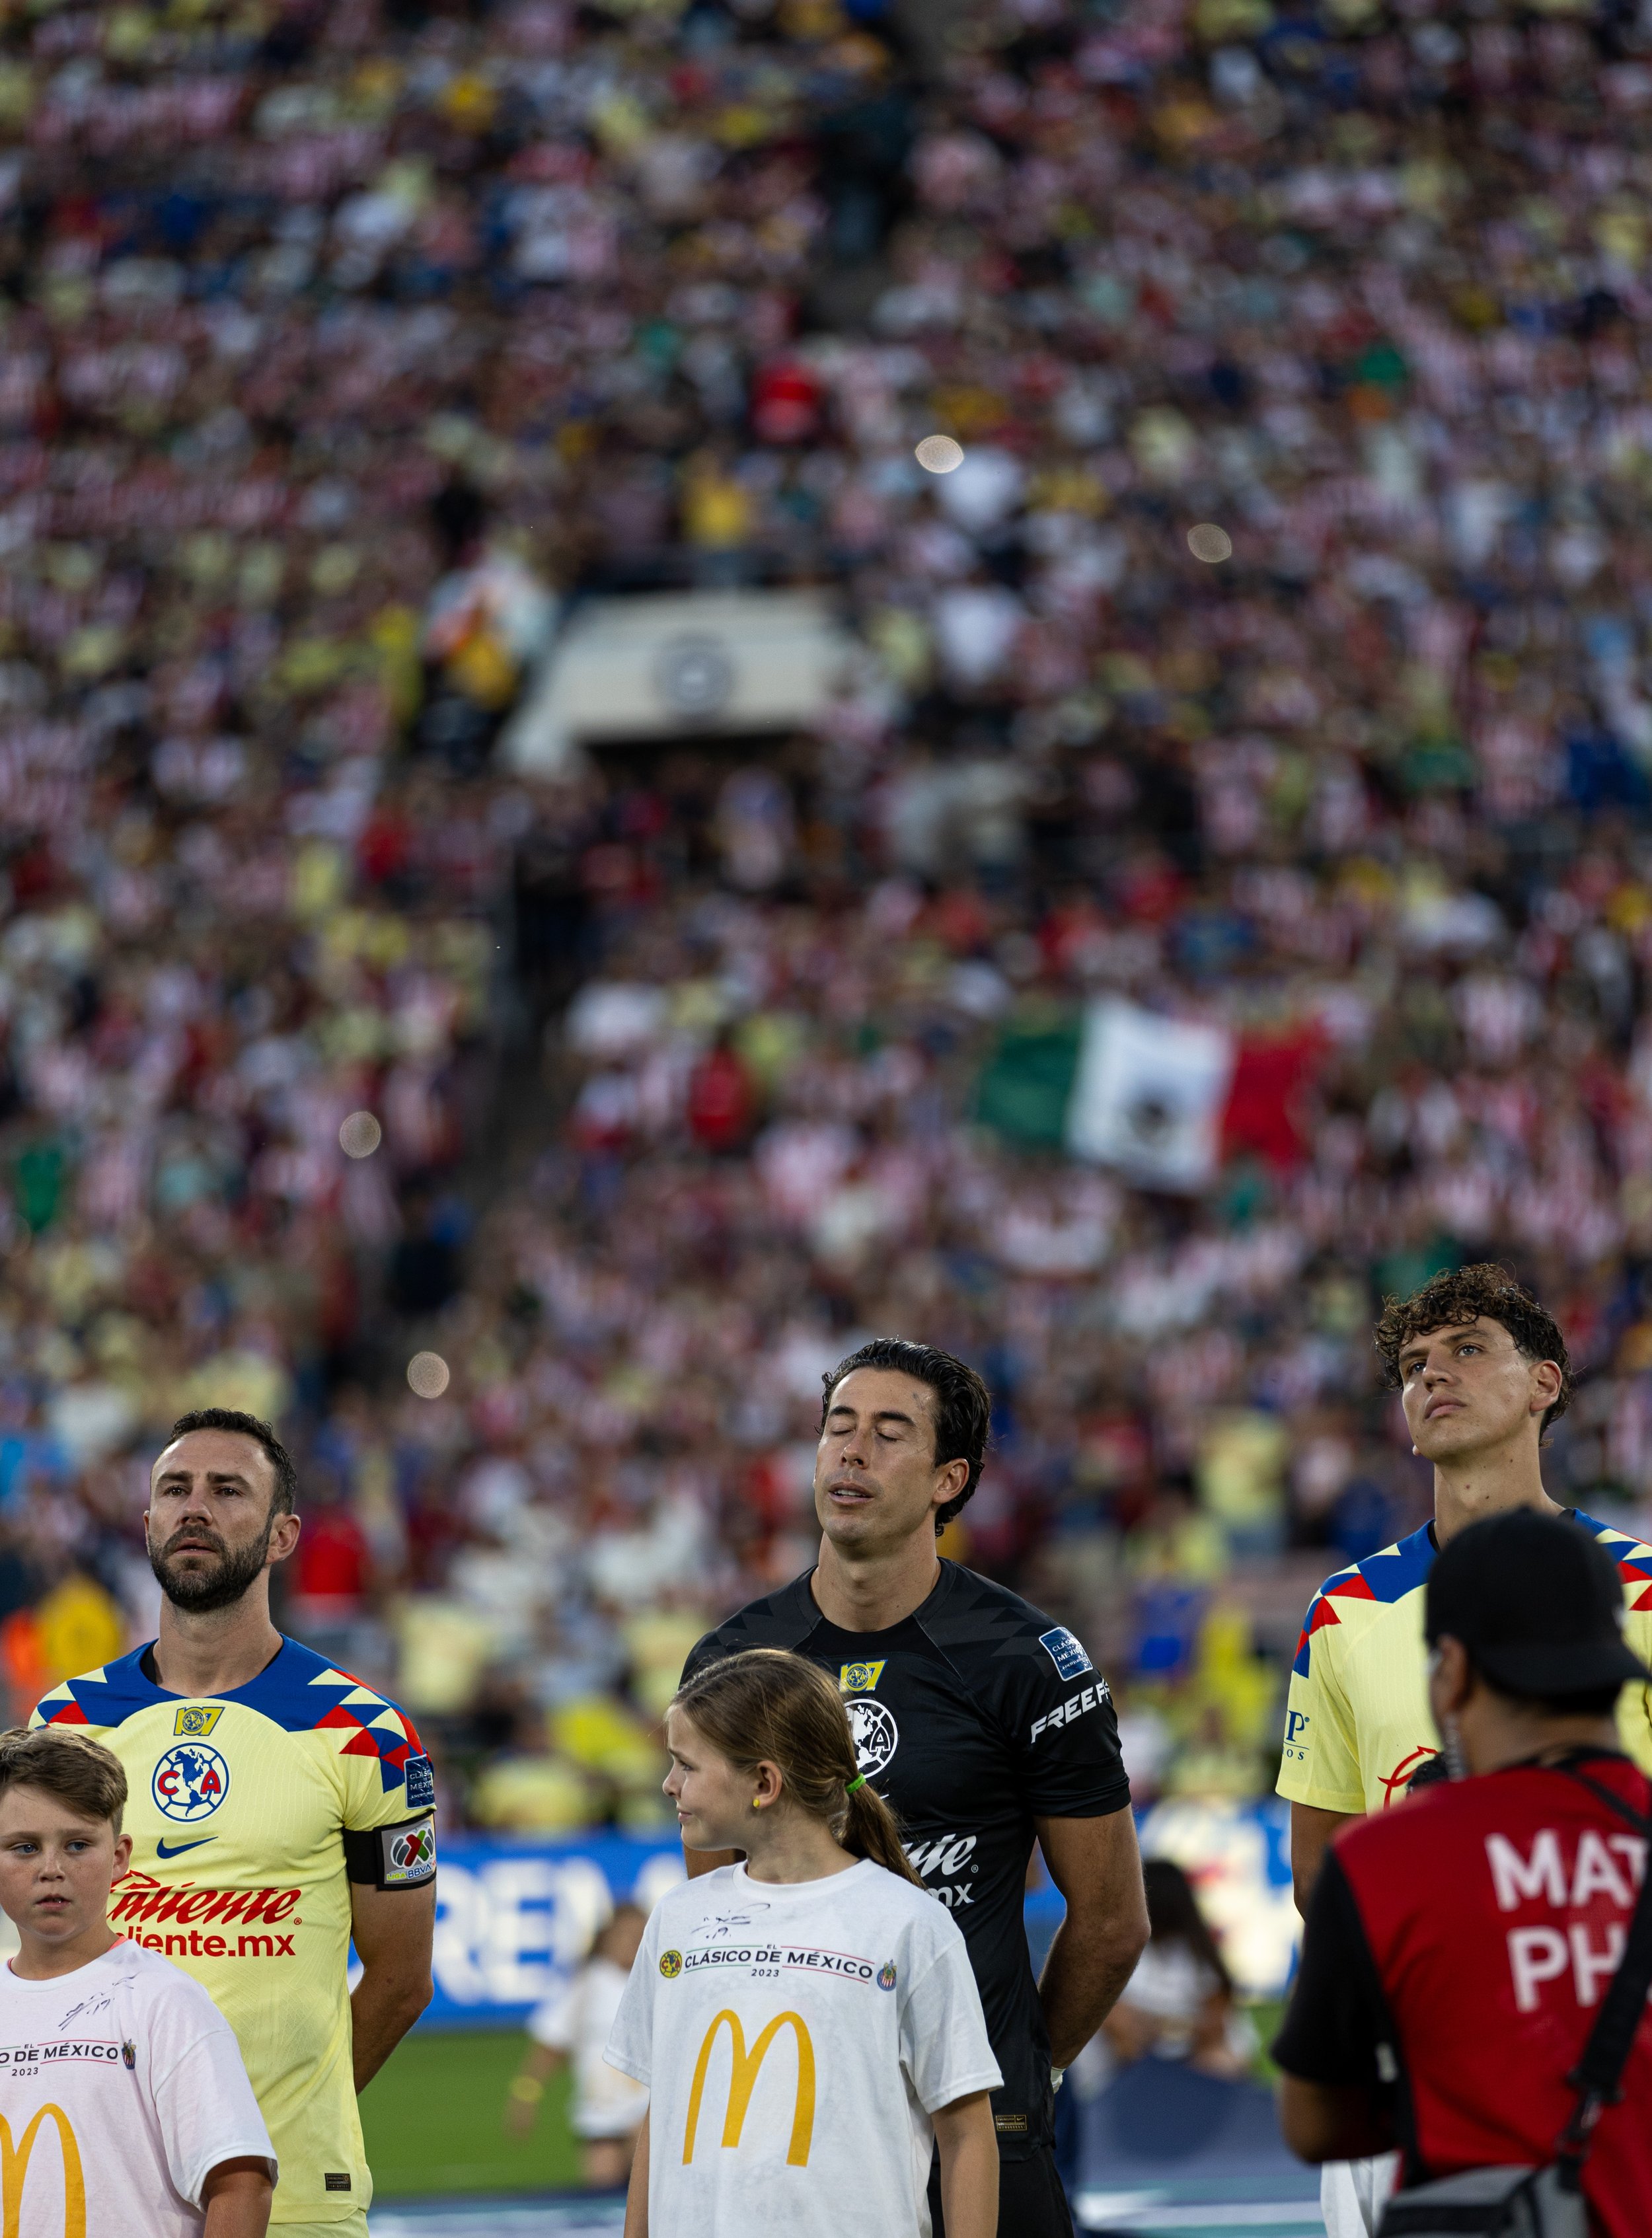  Club America captain Miguel Layun, goalie Oscar Jimenez and Igor Lichnovsky(L-R) singing along with the Mexican national anthem before the start of El Clasico in the Rose Bowl at Pasadena, Calif. on Sunday, Oct. 15. (Danilo Perez | The Corsair) 